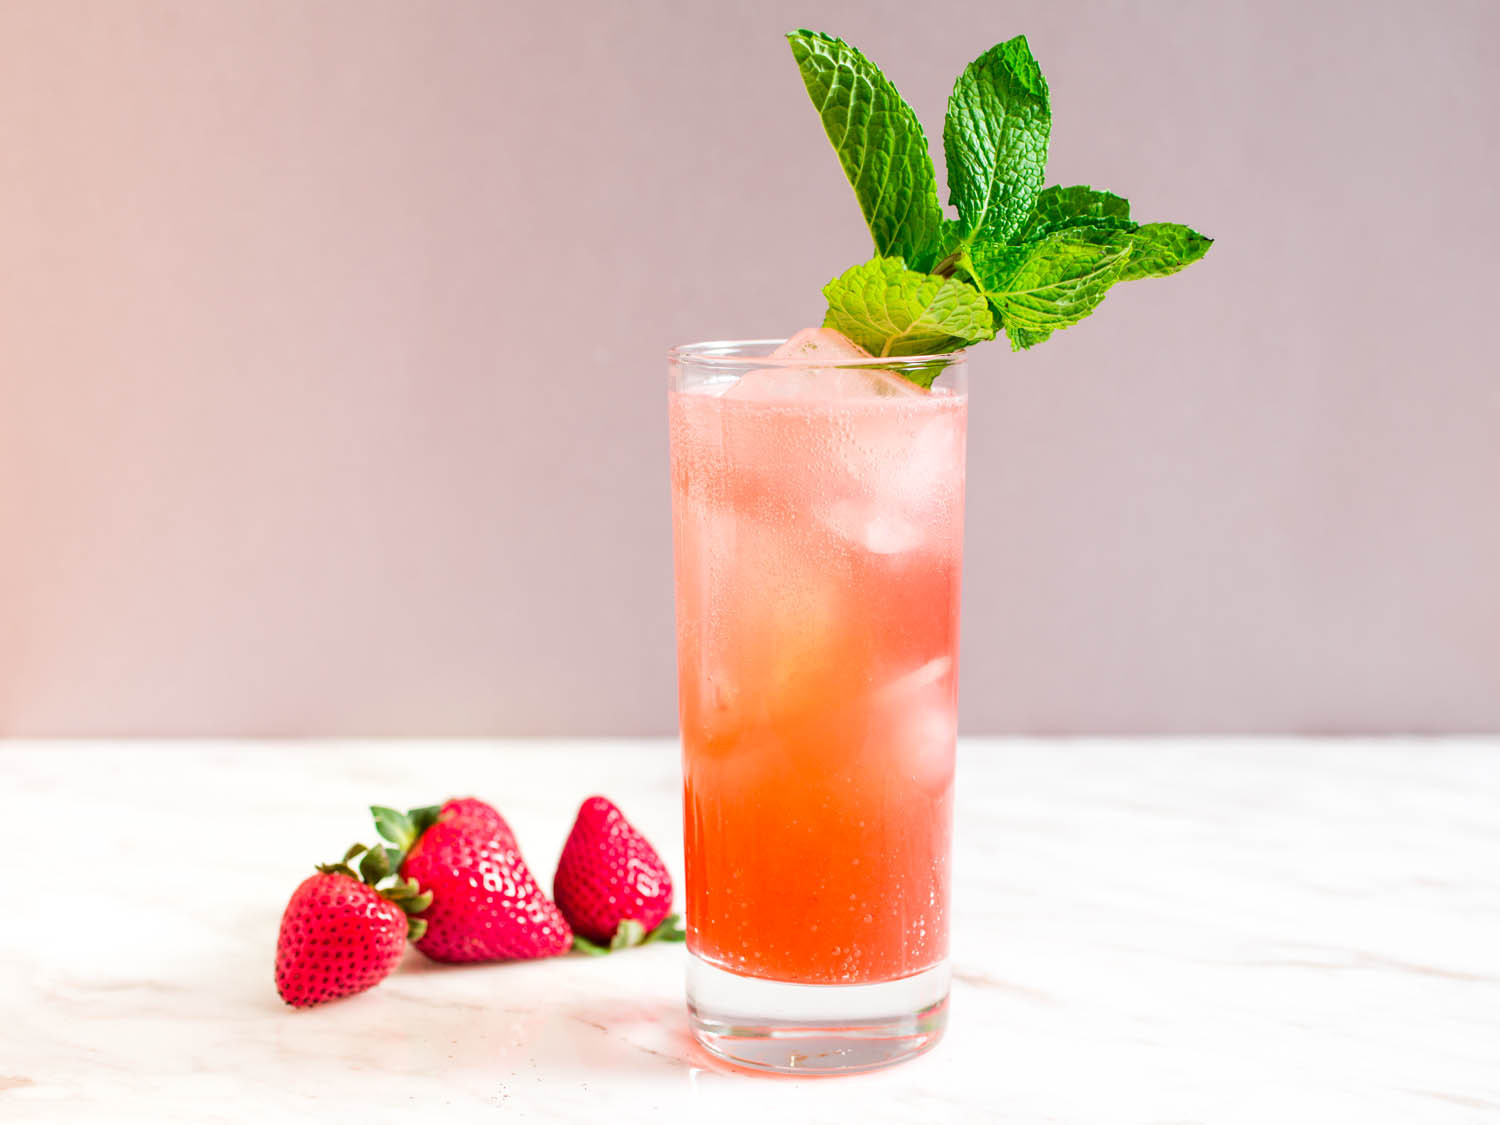 Strawberry Vodka Drinks
 Just 1 Bottle 9 Cocktails to Make With Vodka and a Trip